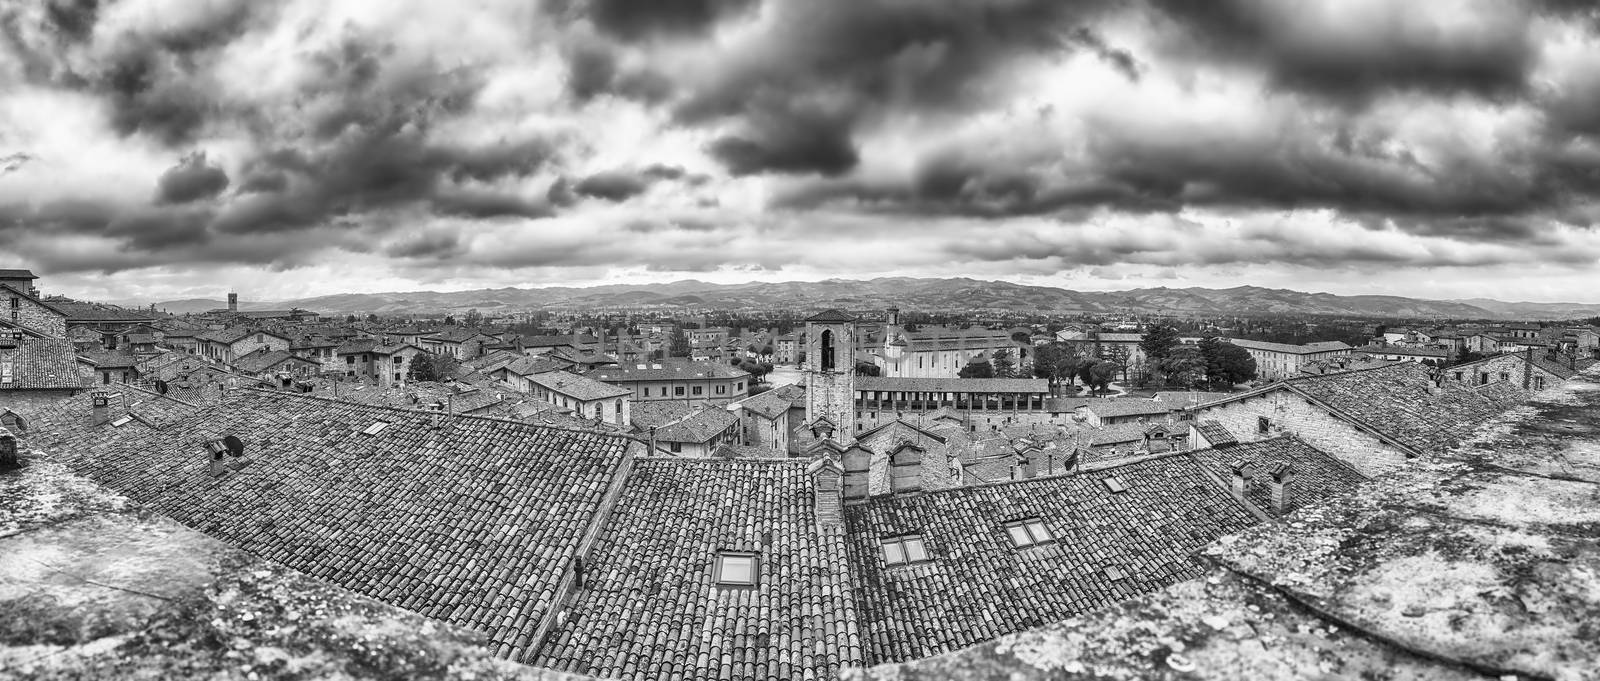 Panoramic view over the roofs of Gubbio, Italy by marcorubino